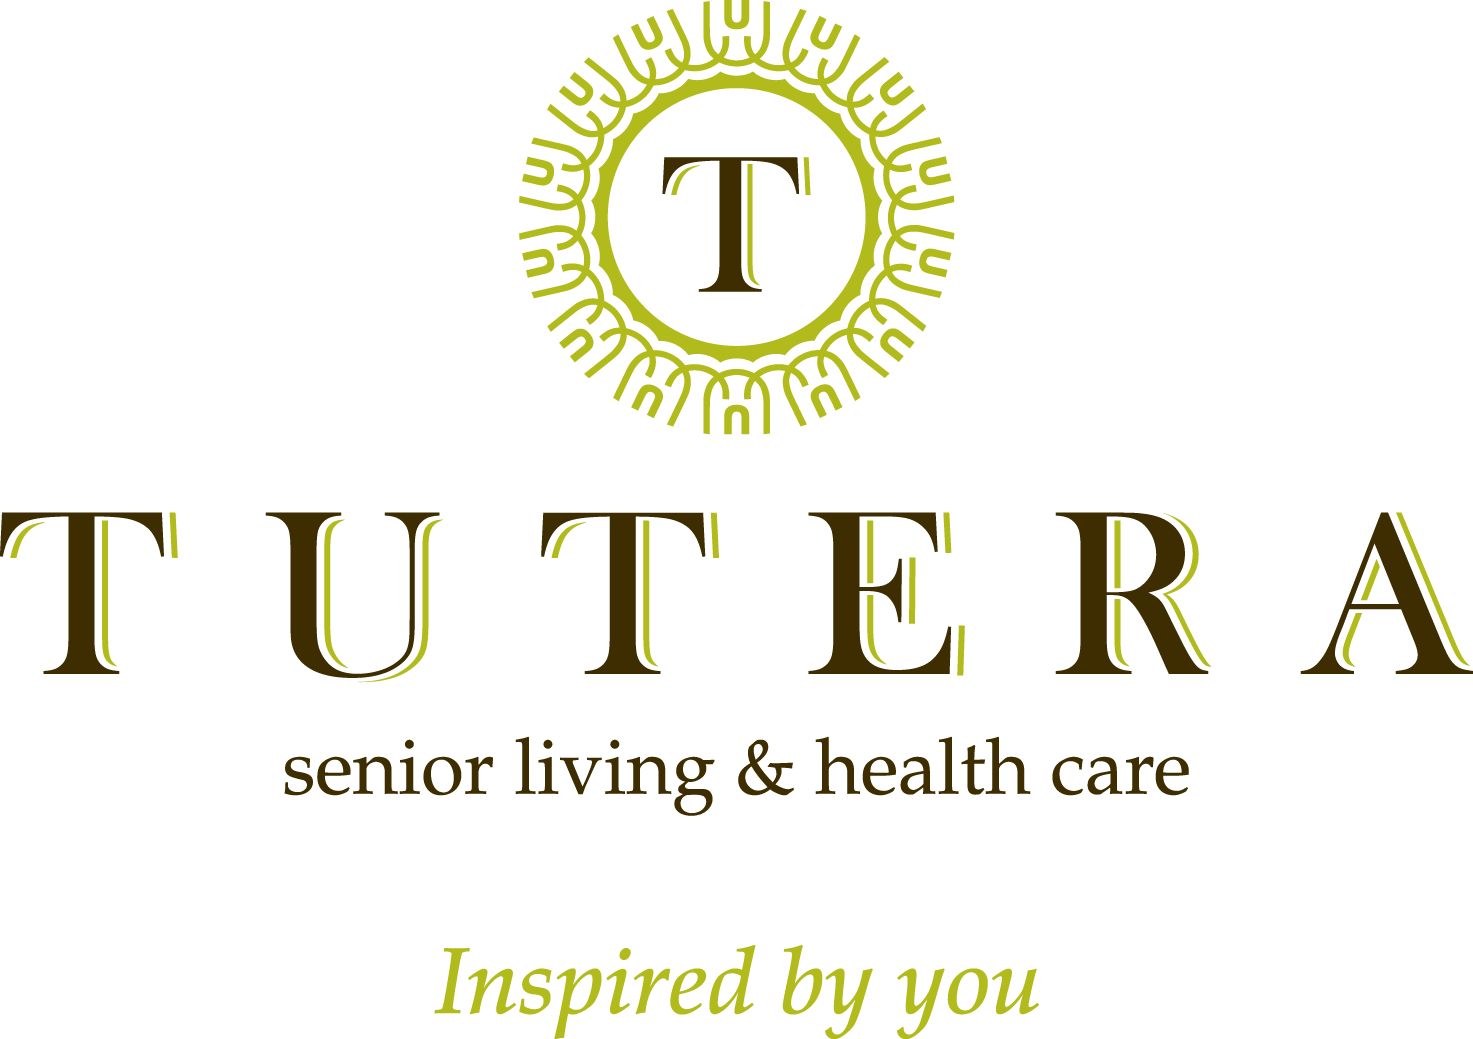 Tutera Senior Living & Health Care is one of the nation’s premier providers of diversified, post-acute senior health care services with headquarters in Kansas City, Mo.